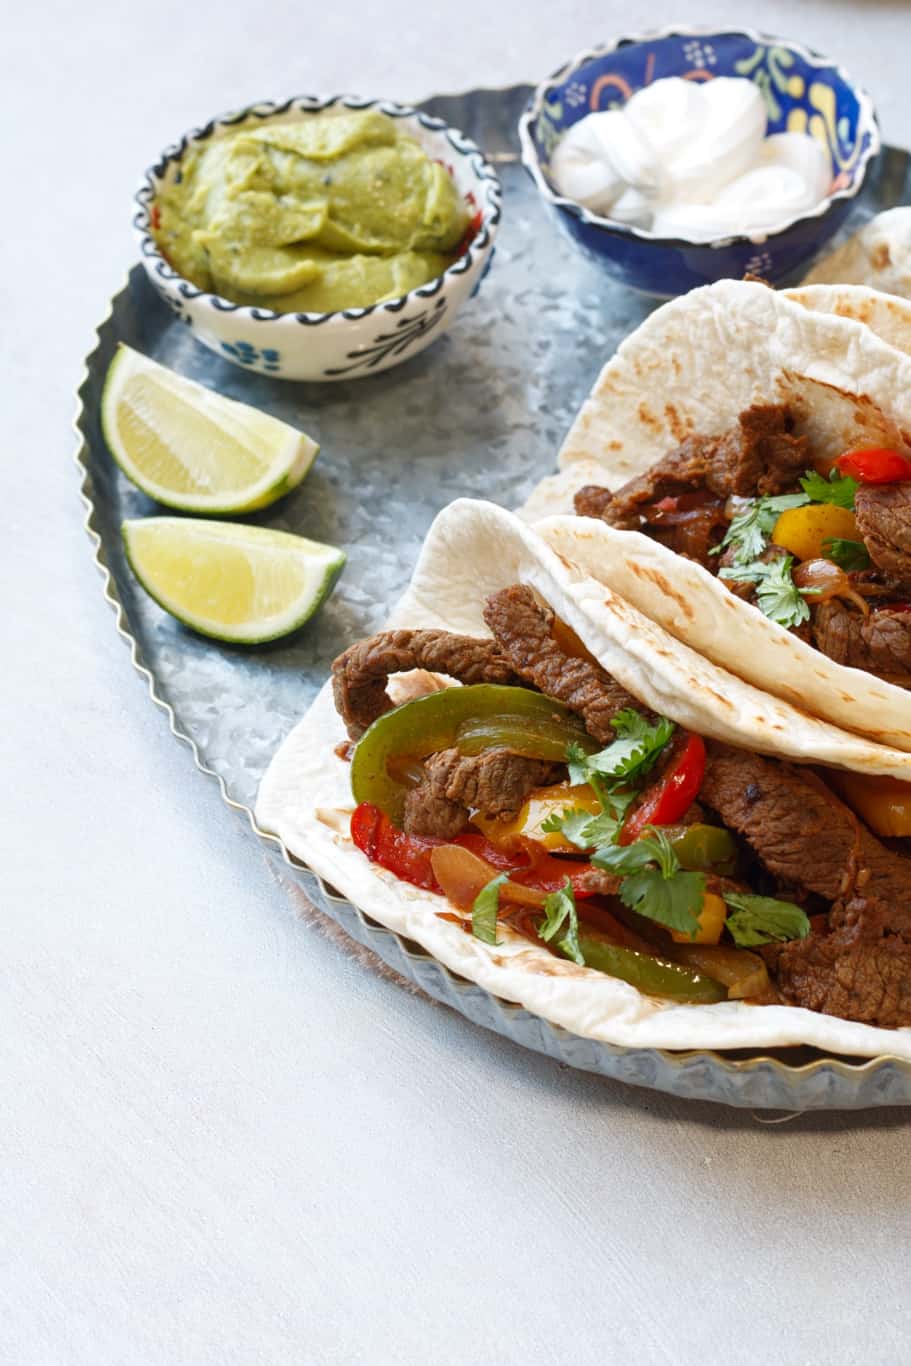 warm low-carb tortillas filled with keto beef fajitas which are made up of beef meat, onions, green, red, and yellow bell peppers and served with lime wedges, guacamole, and sour cream